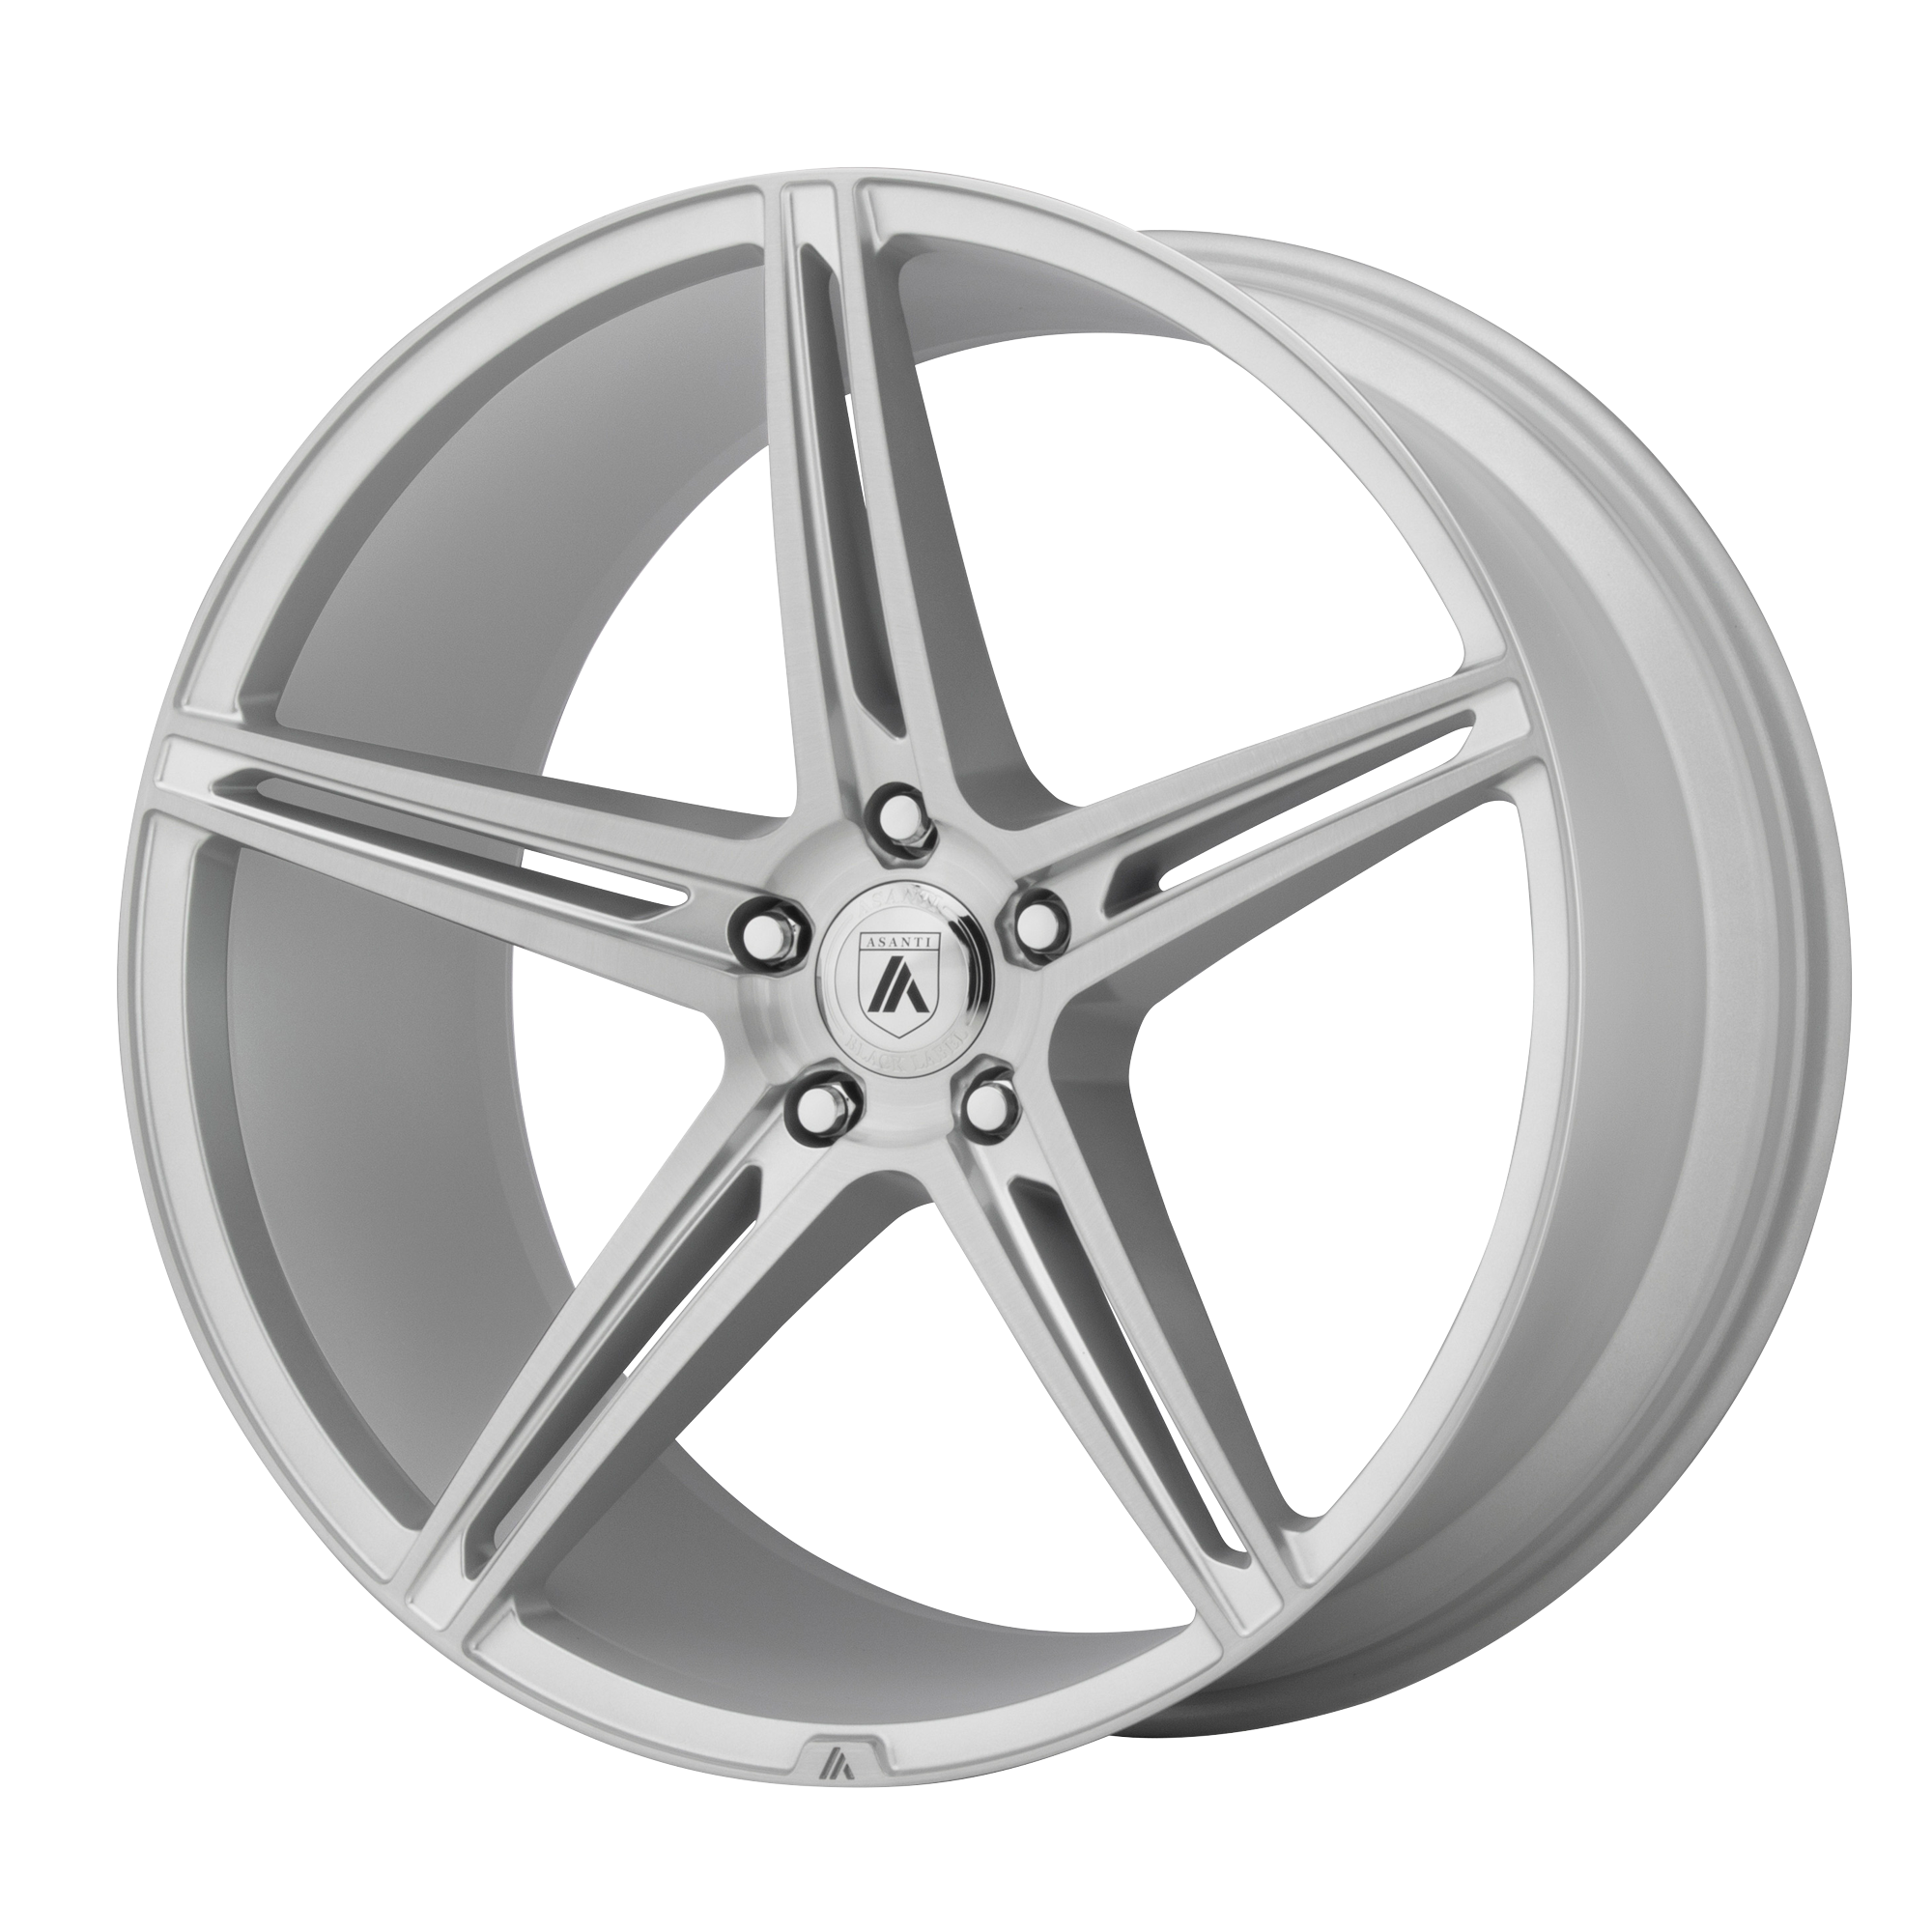 ALPHA 5 22x9 5x115.00 BRUSHED SILVER (15 mm) - Tires and Engine Performance